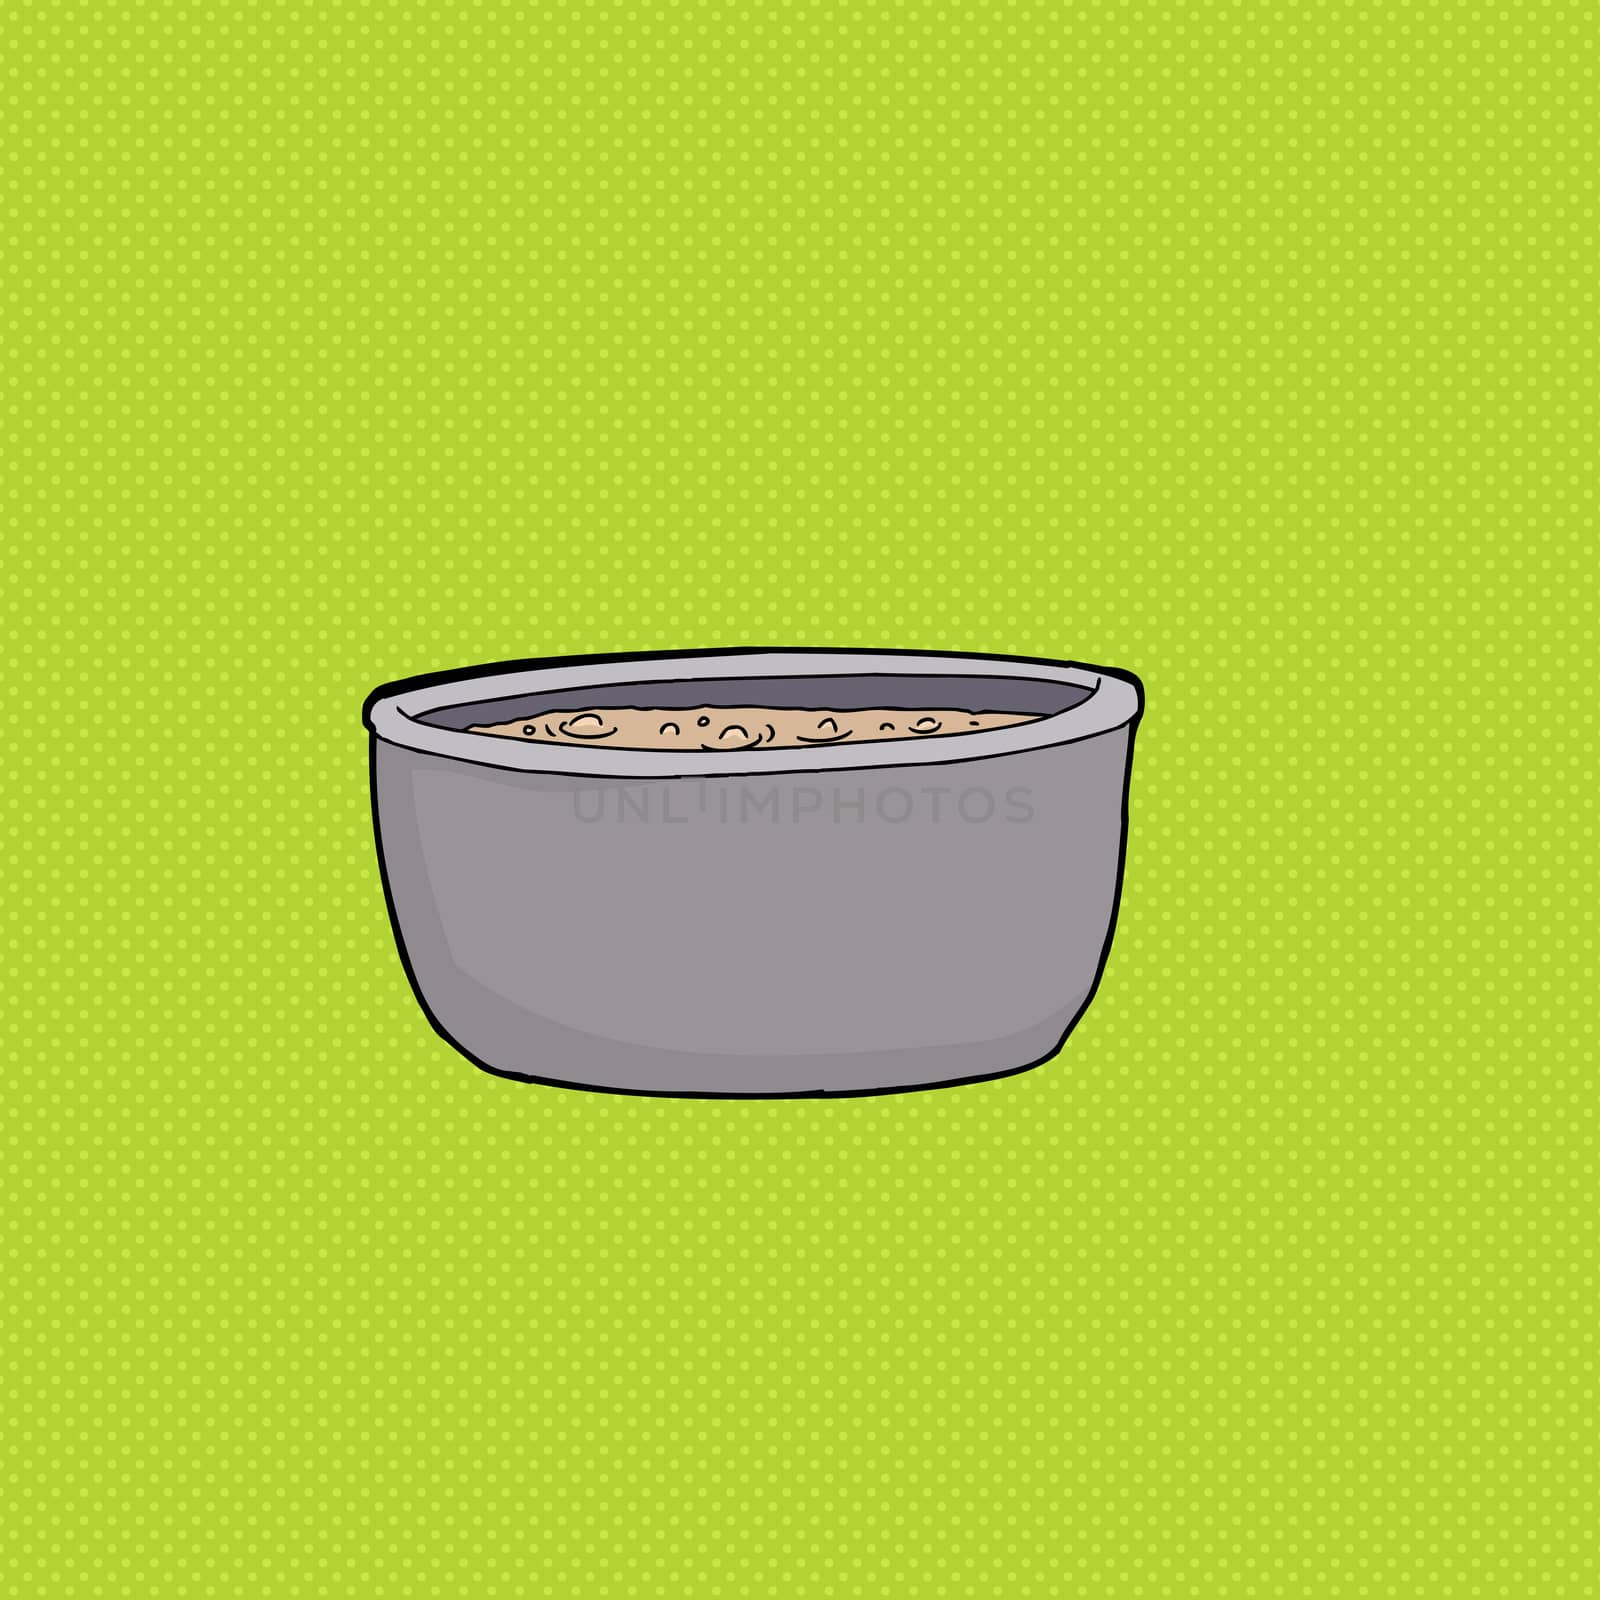 Hot Soup Over Green Background by TheBlackRhino